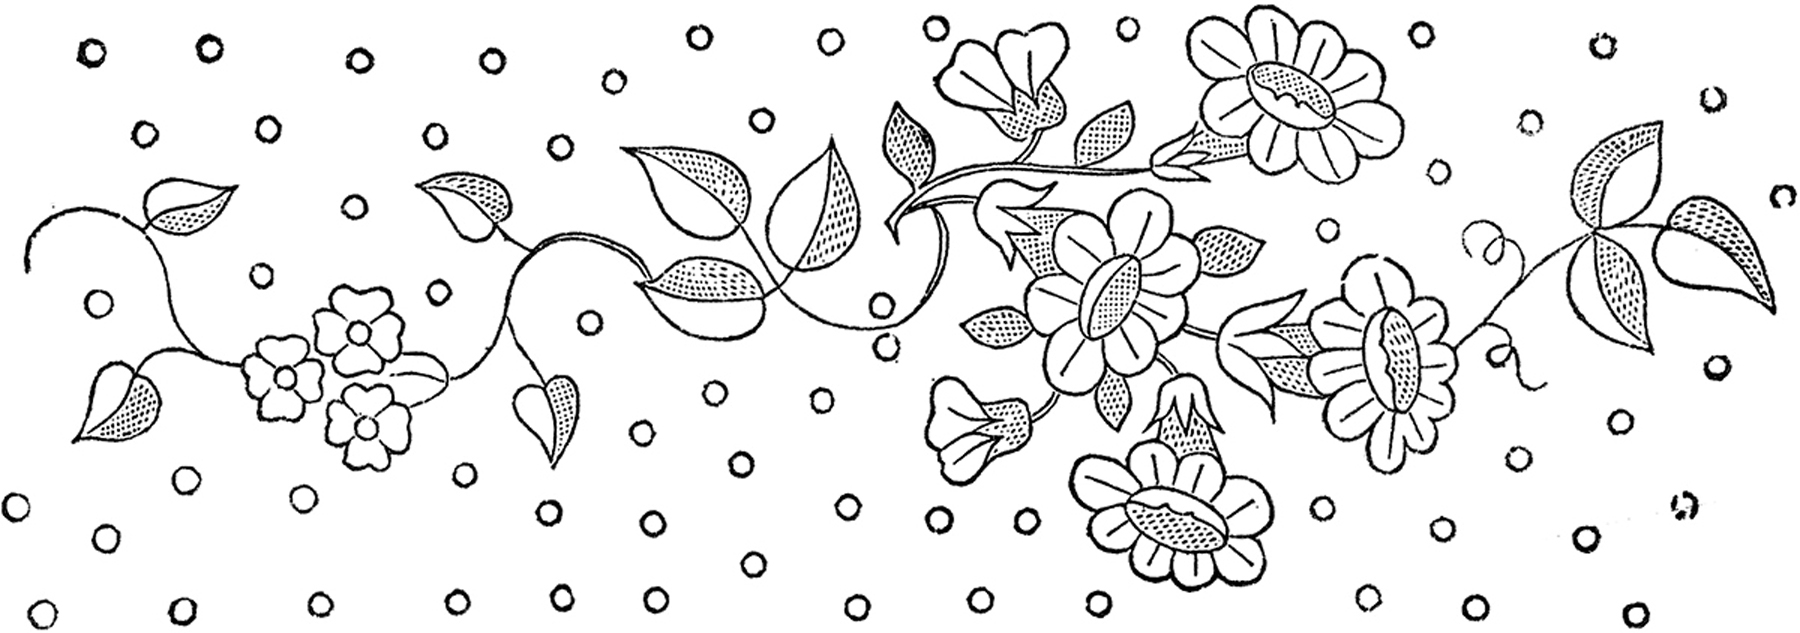 Patterns For Embroidery Floral Embroidery Patterns Pretty The Graphics Fairy